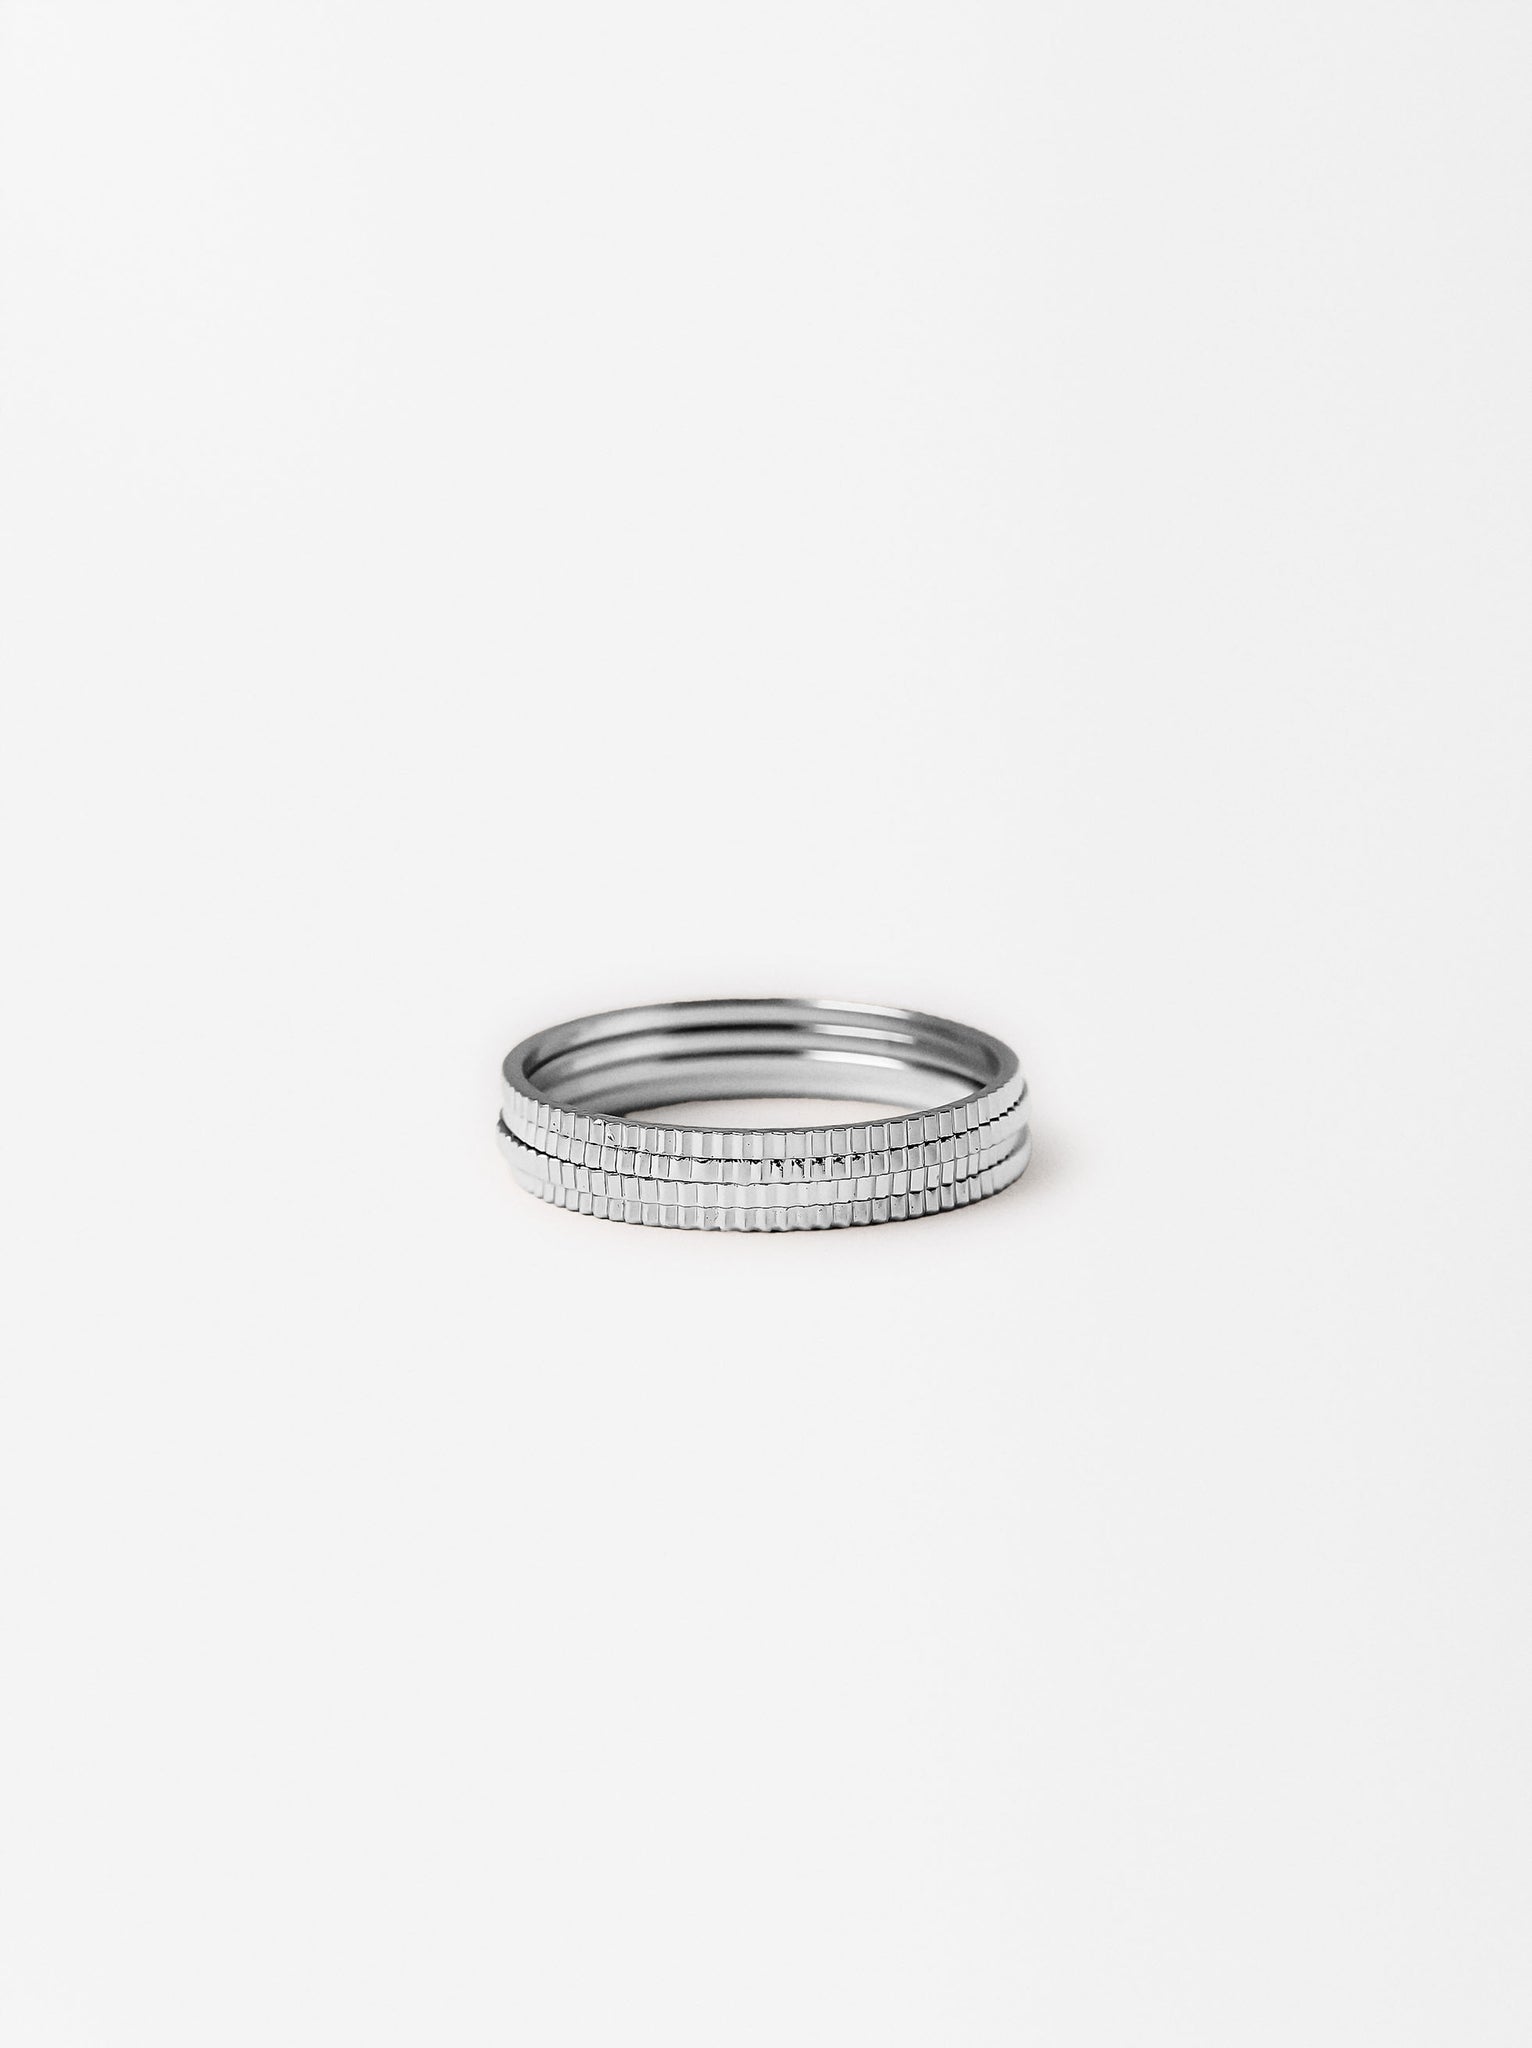 Set Of Silver Rings